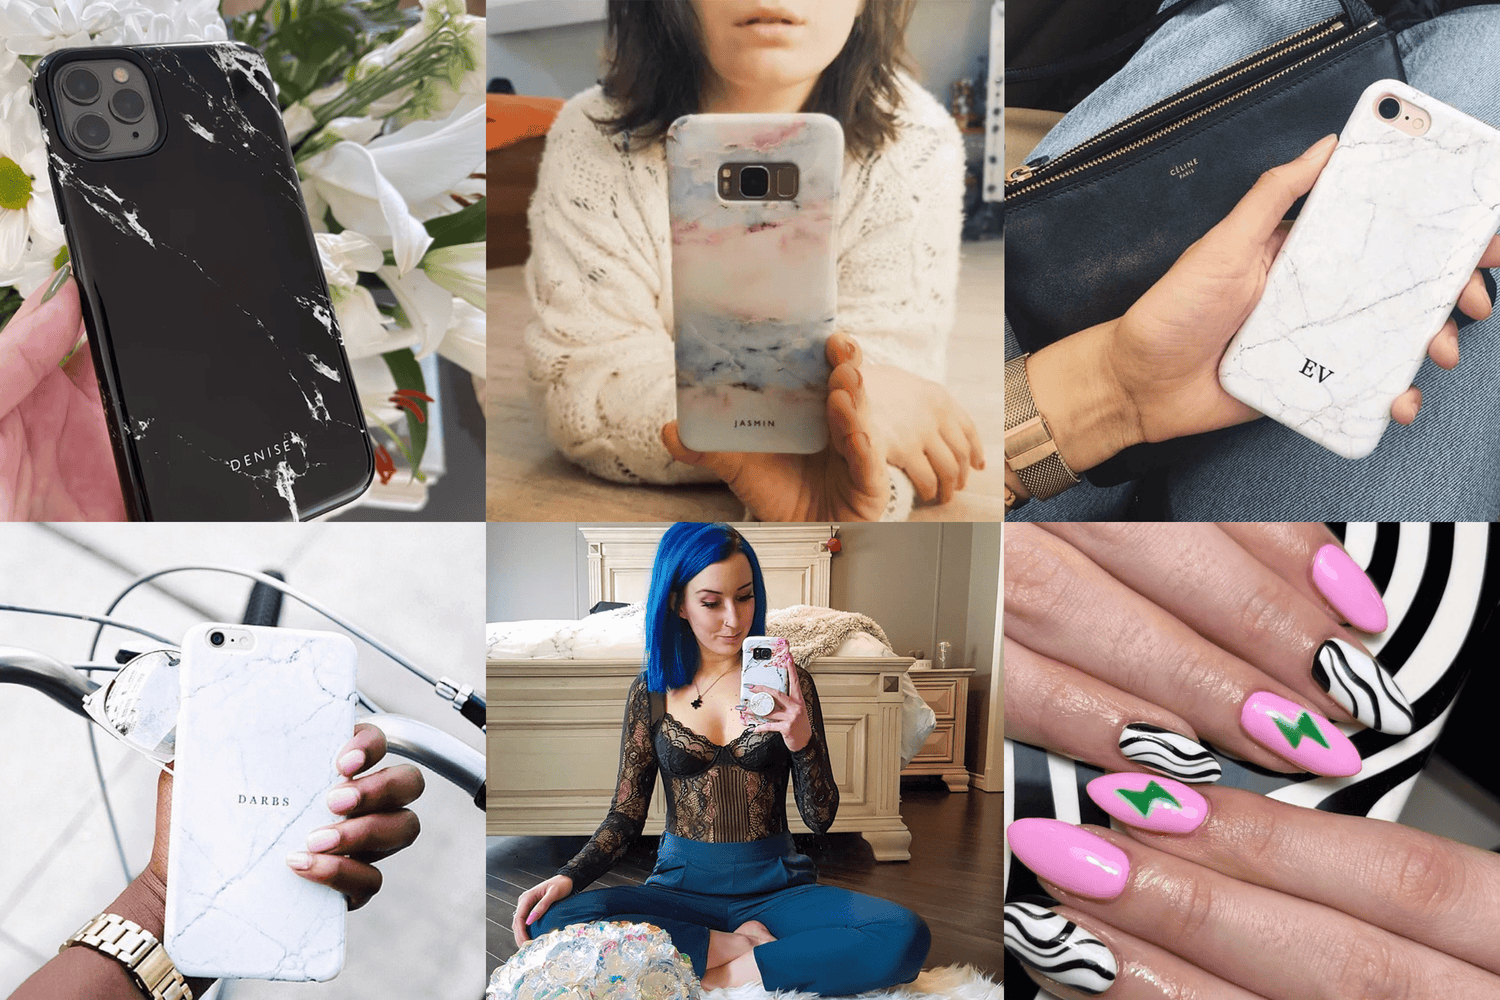 6 photos of customers showing their phone cases from Instagram